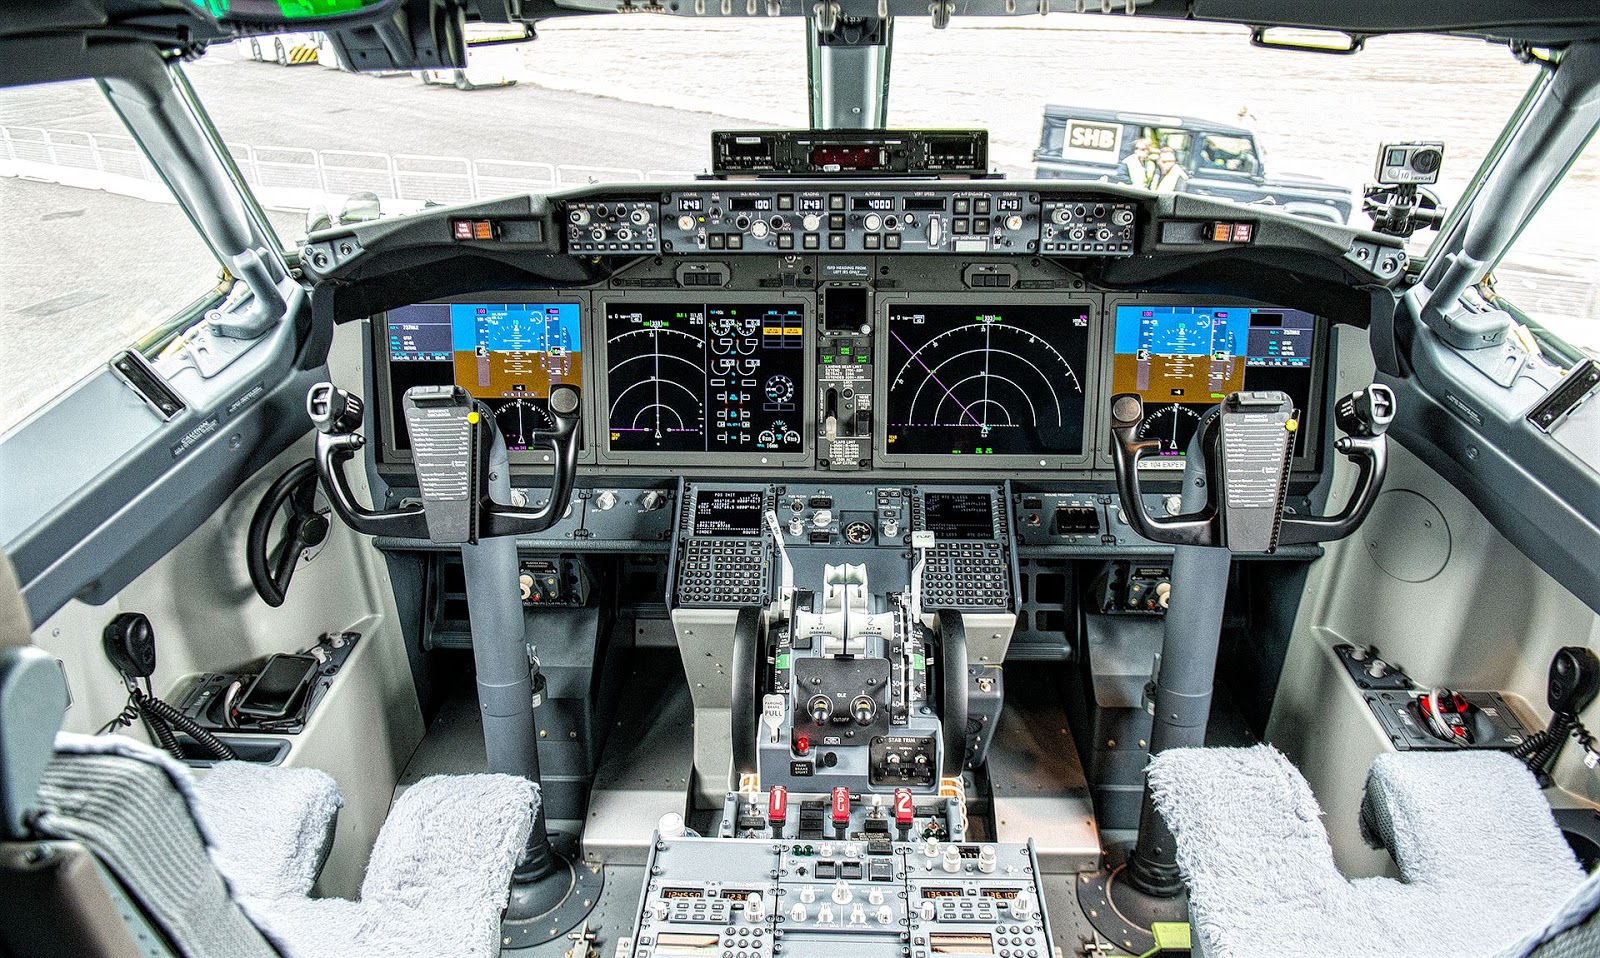 Boeing 737 Max Cockpit Layout Aircraft Wallpapers Galleries | Free ...